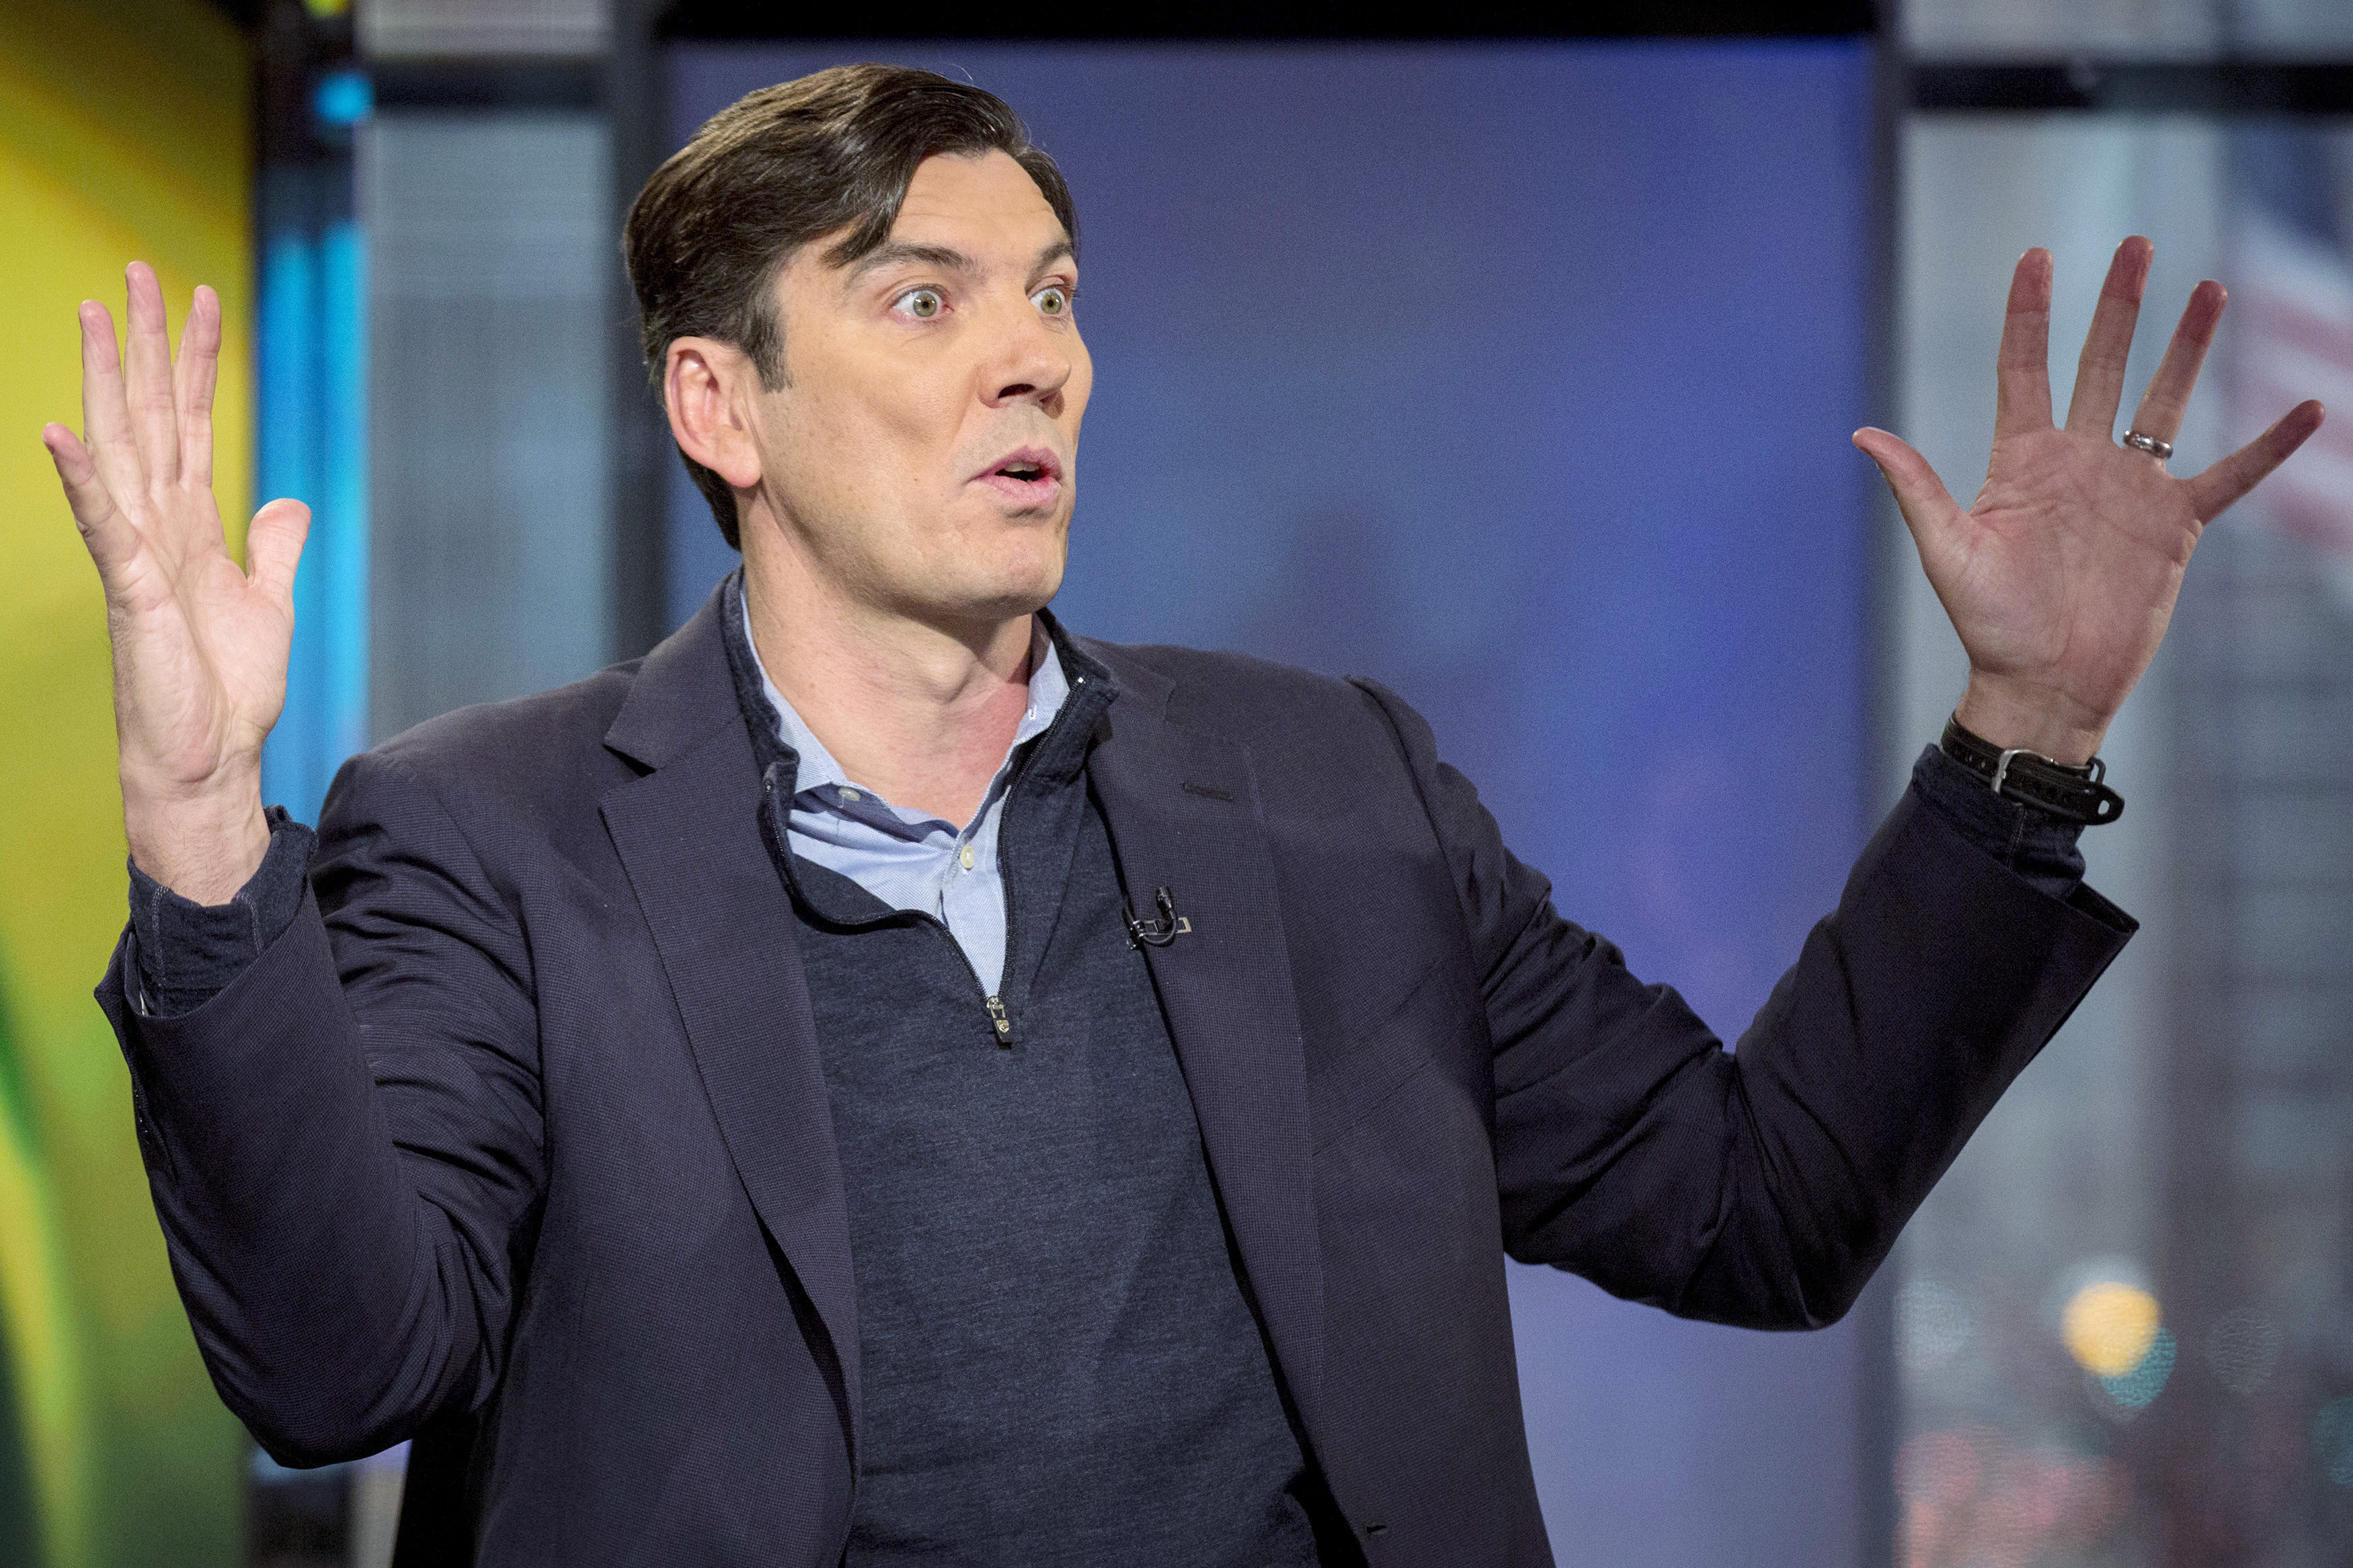 Tim Armstrong, Chairman and CEO of AOL Inc., speaks during an interview with Fox Business Channel in New York December 3, 2014. (© Brendan McDermid / Reuters&mdash;REUTERS)